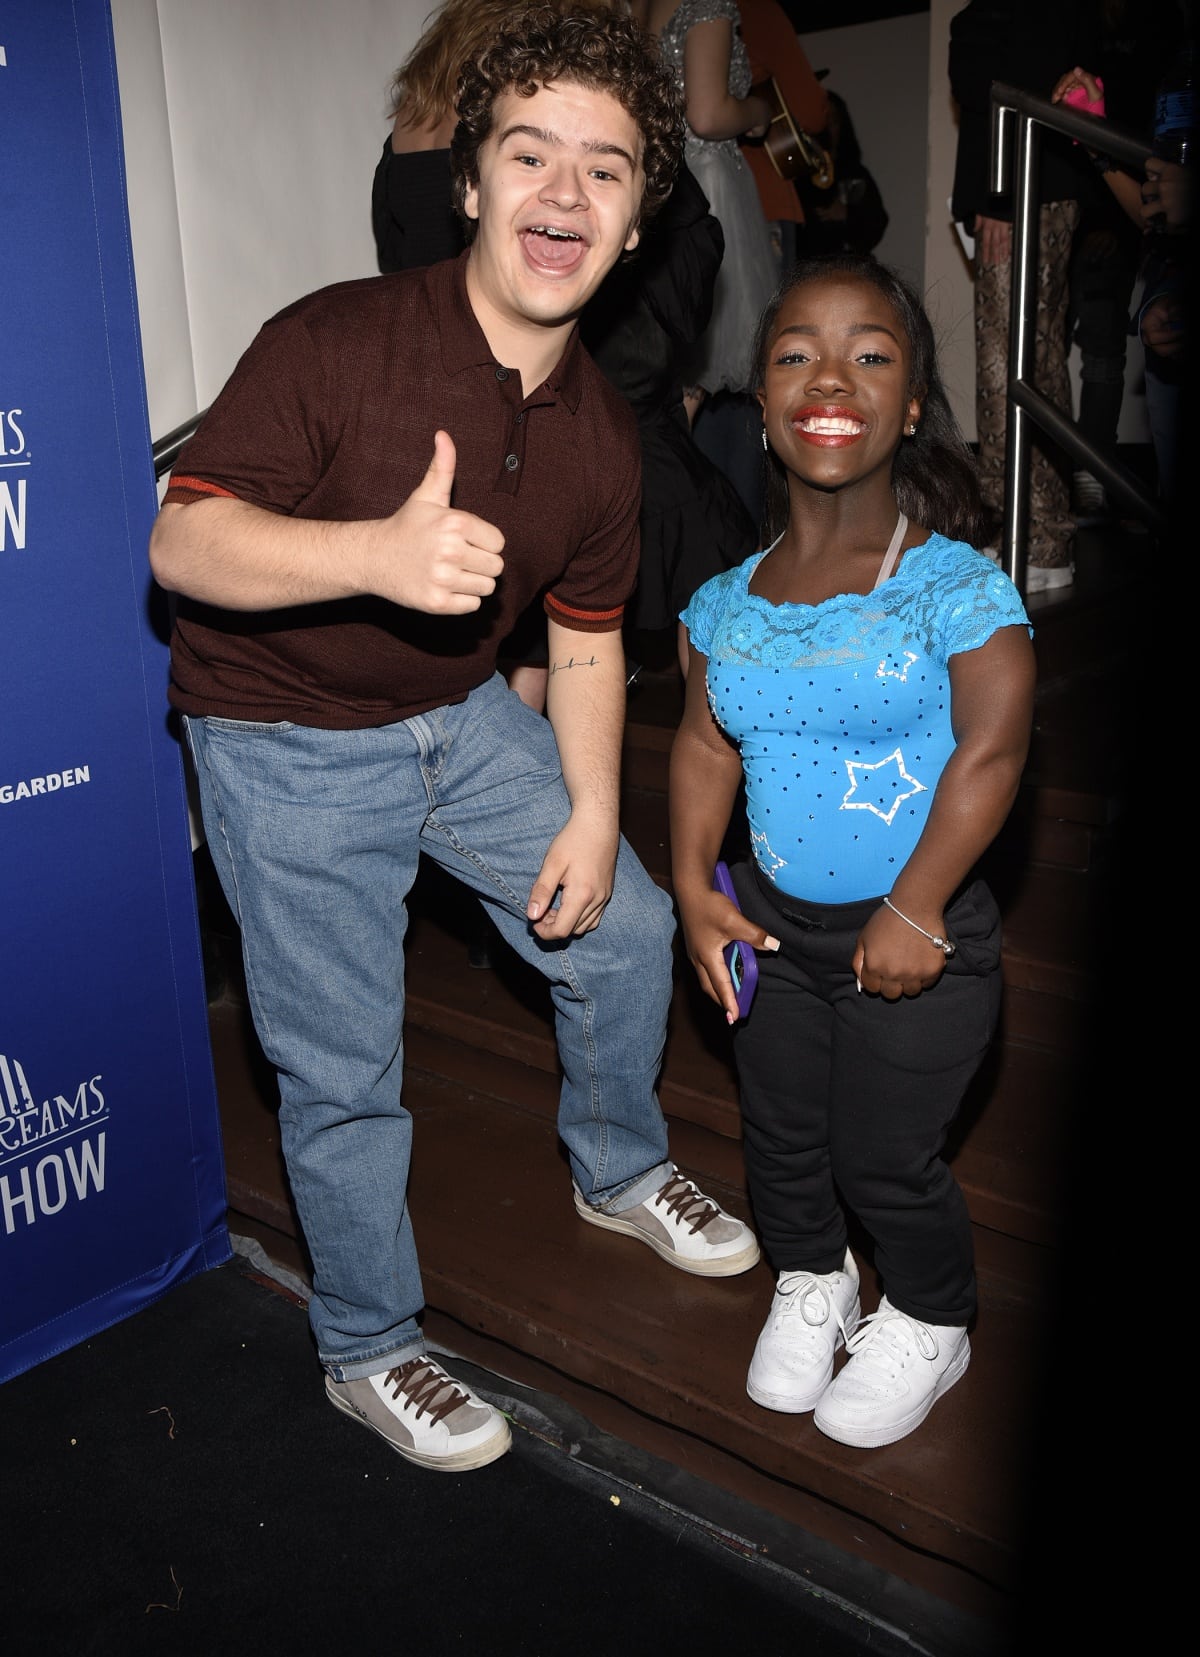 Gaten Matarazzo with a fan at the 2022 Garden of Dreams Talent Show